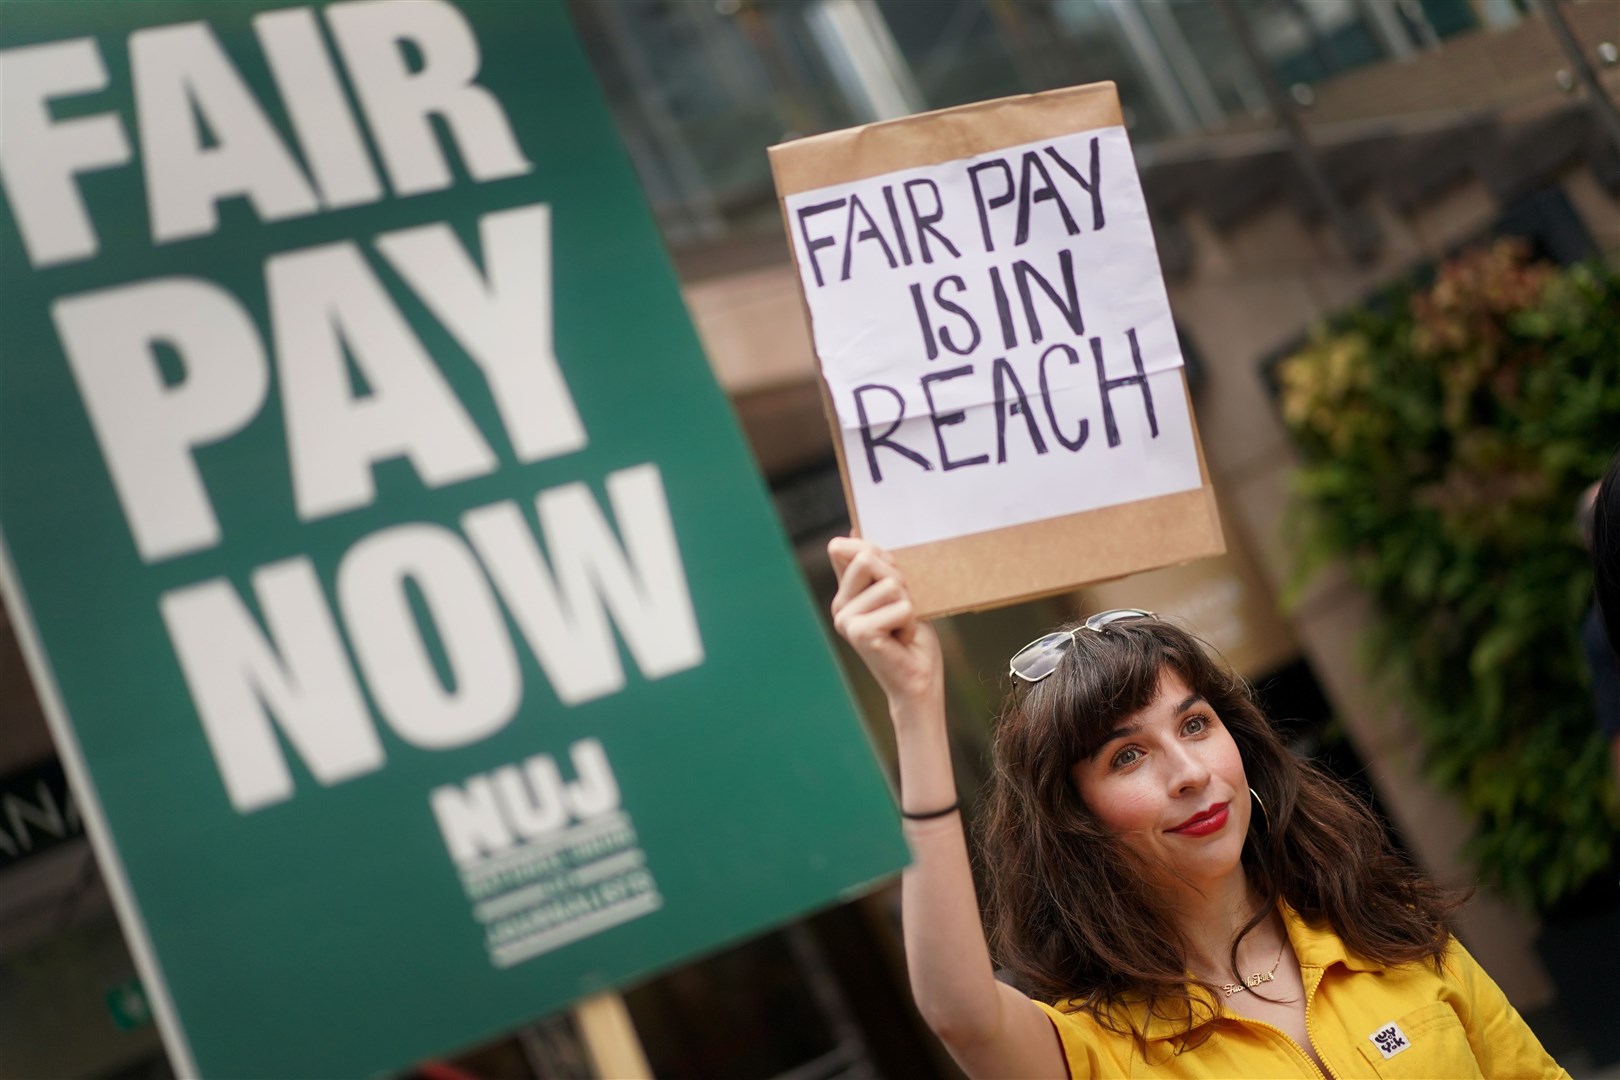 A member of the National Union of Journalists on the picket line outside the offices of Reach Plc in Canary Wharf, London (Victoria Jones/PA)